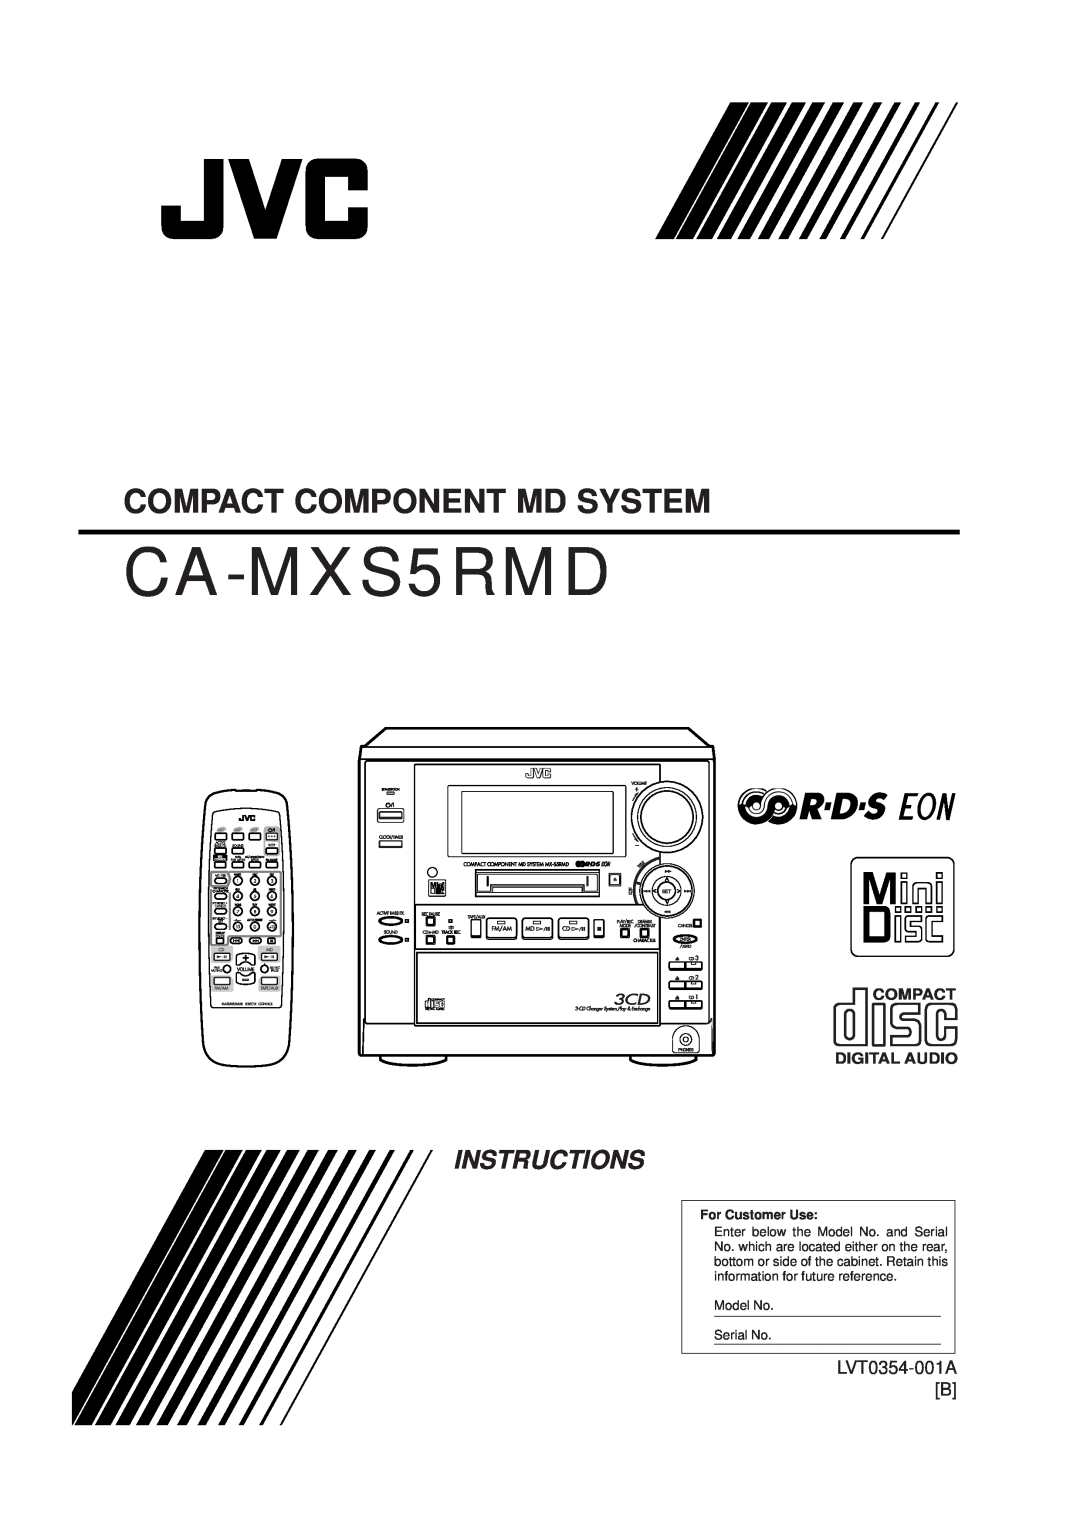 JVC CA-MXS5RMDB manual Compact Component Md System, Instructions, LVT0354-001AB, Compact Digital Audio, For Customer Use 